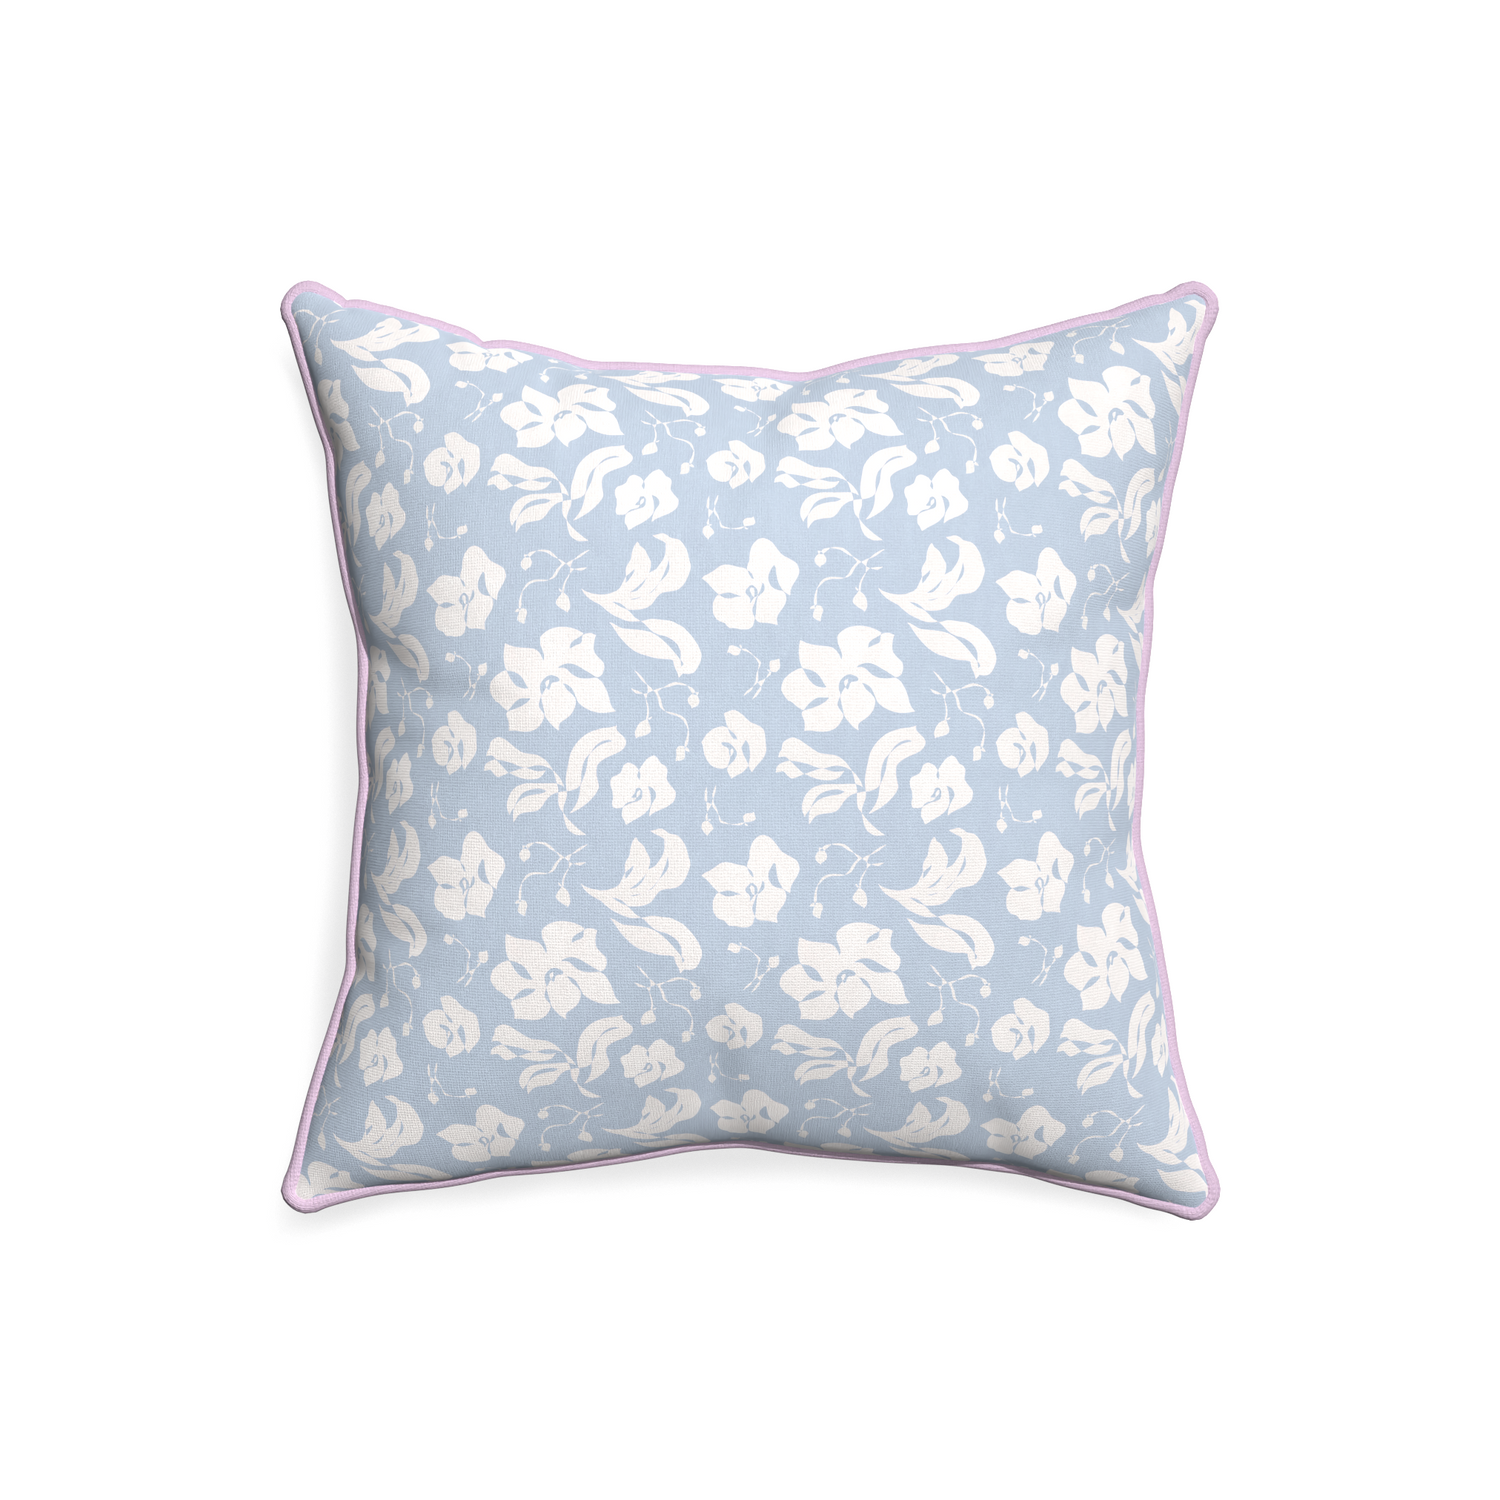 20-square georgia custom cornflower blue floralpillow with l piping on white background